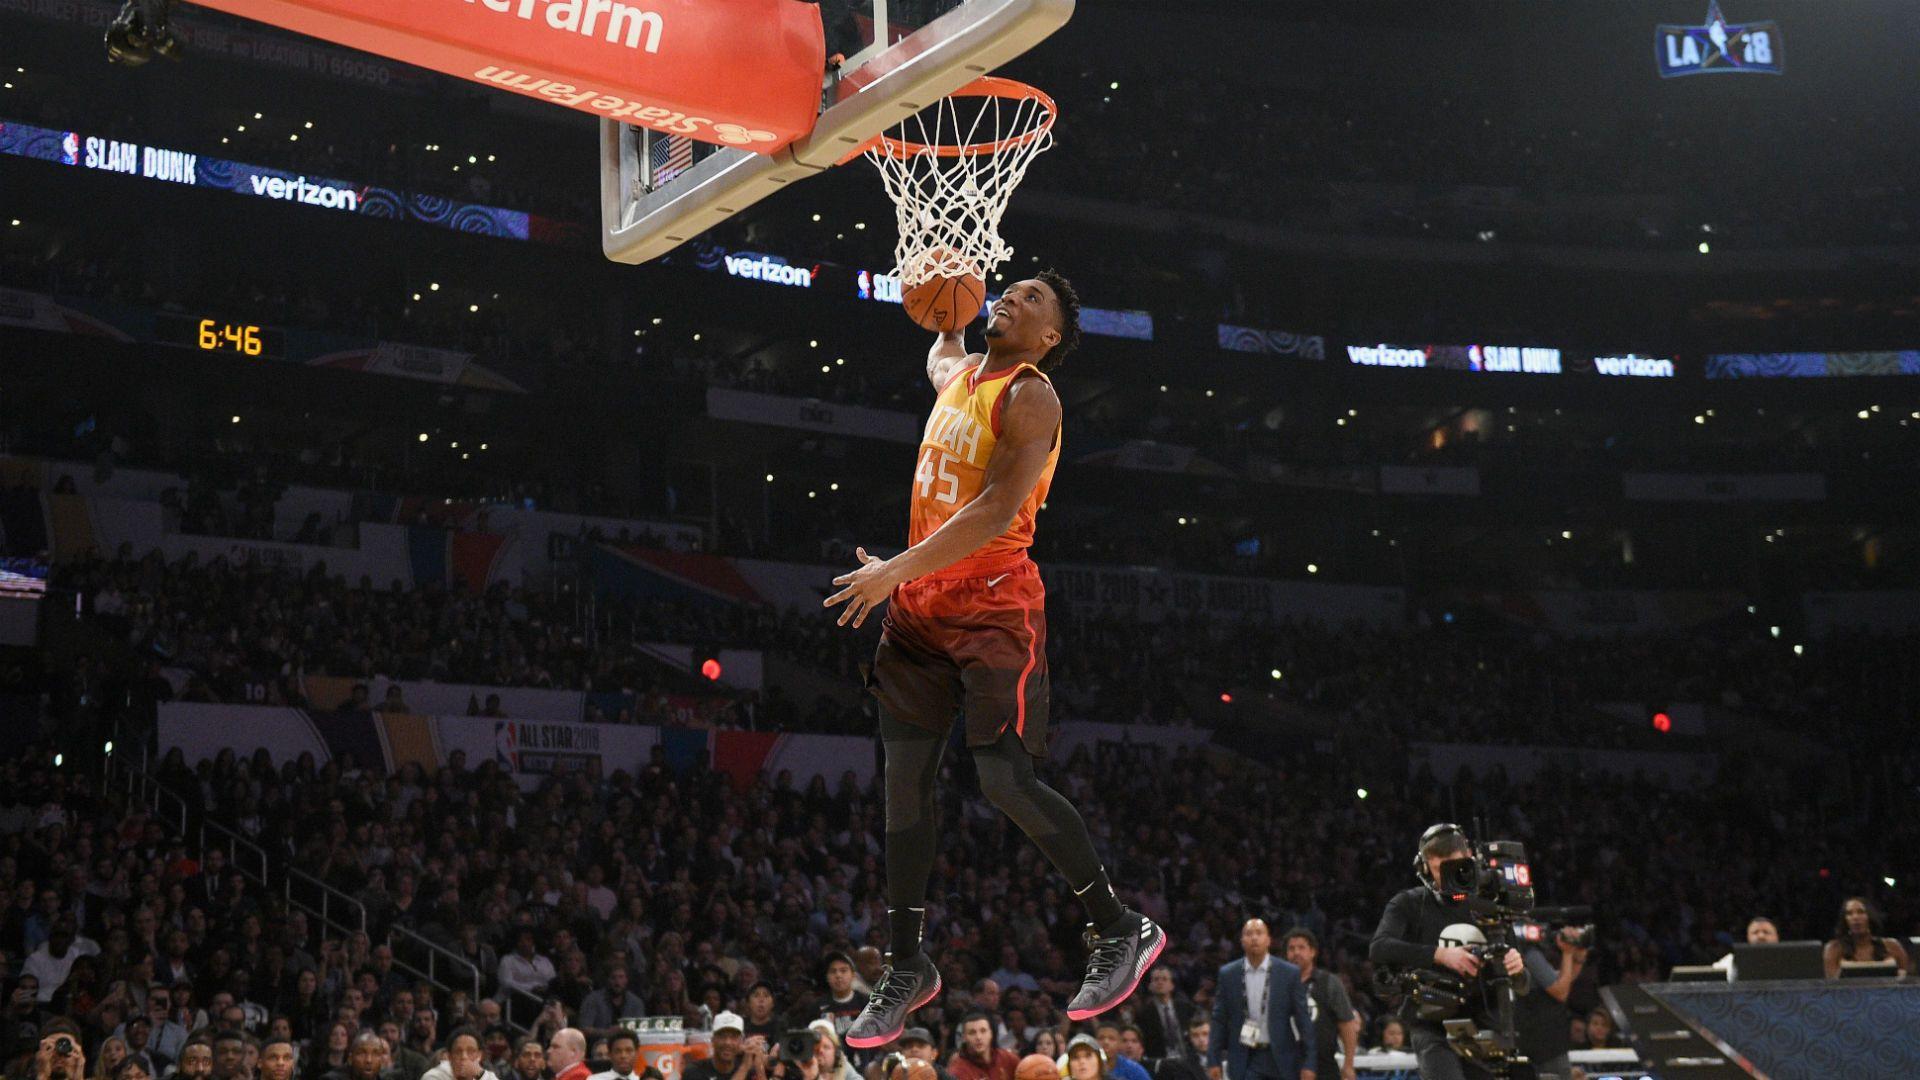 NBA All Star 2018: Slam Dunk Contest Updates, Highlights, Results